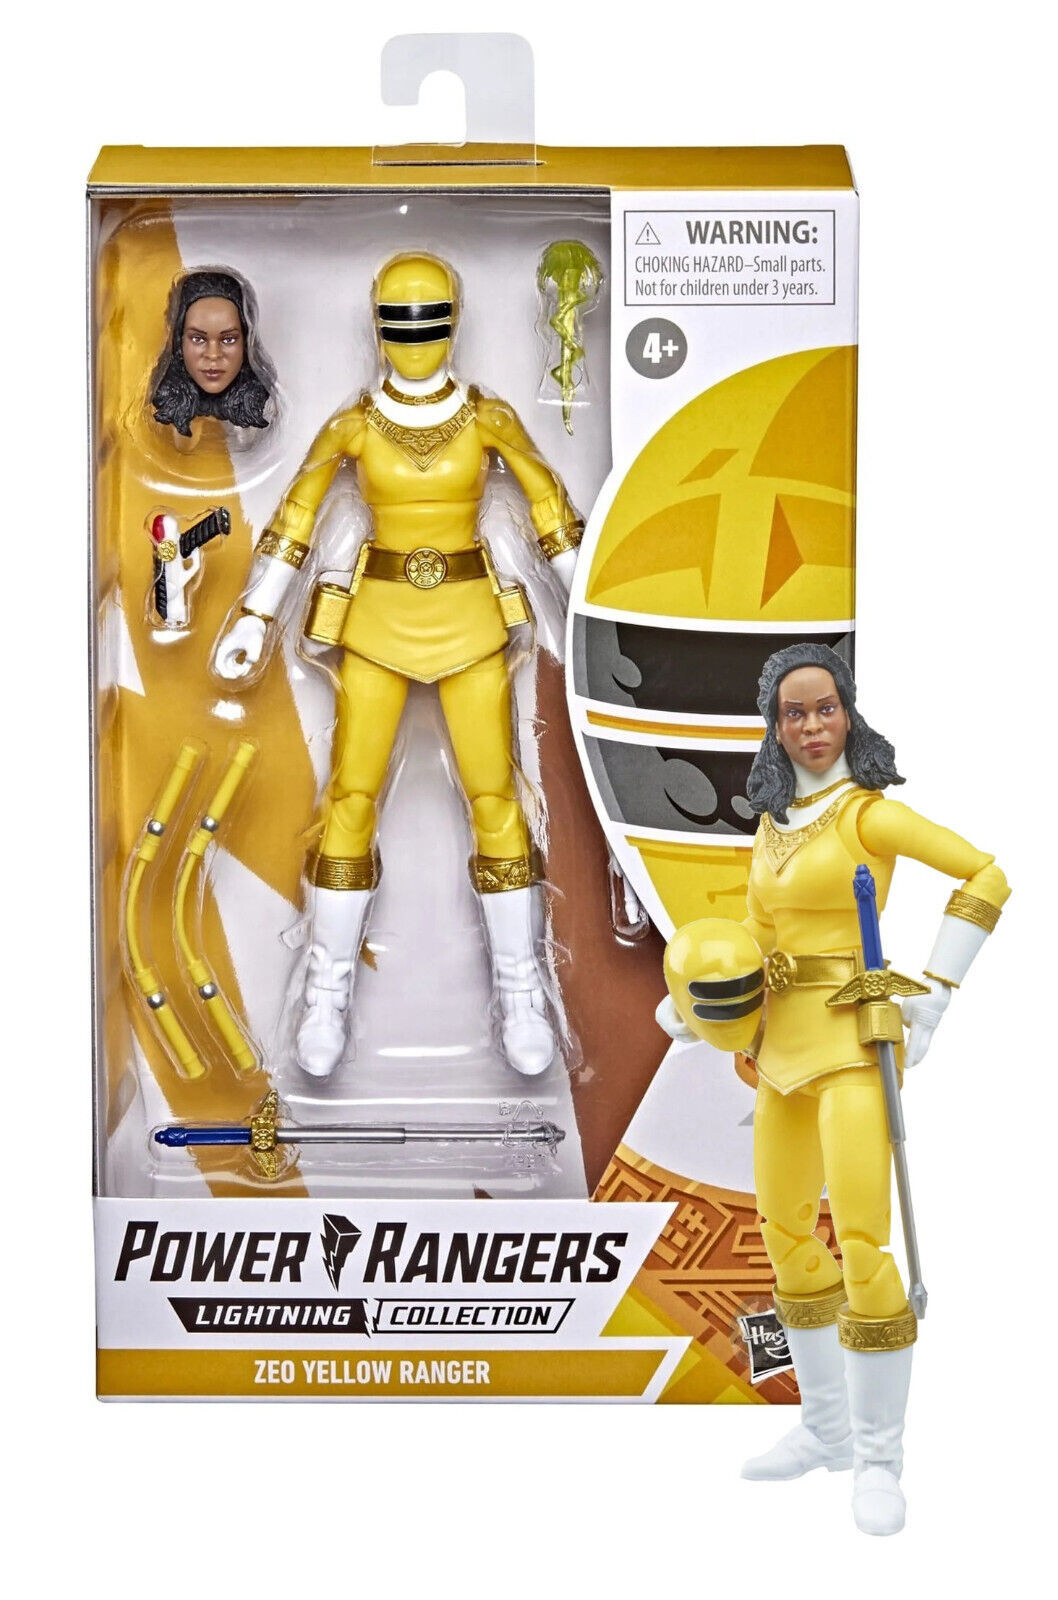 Primary image for Power Rangers Lightning Collection Zeo Yellow Ranger 6" Figure New in Box